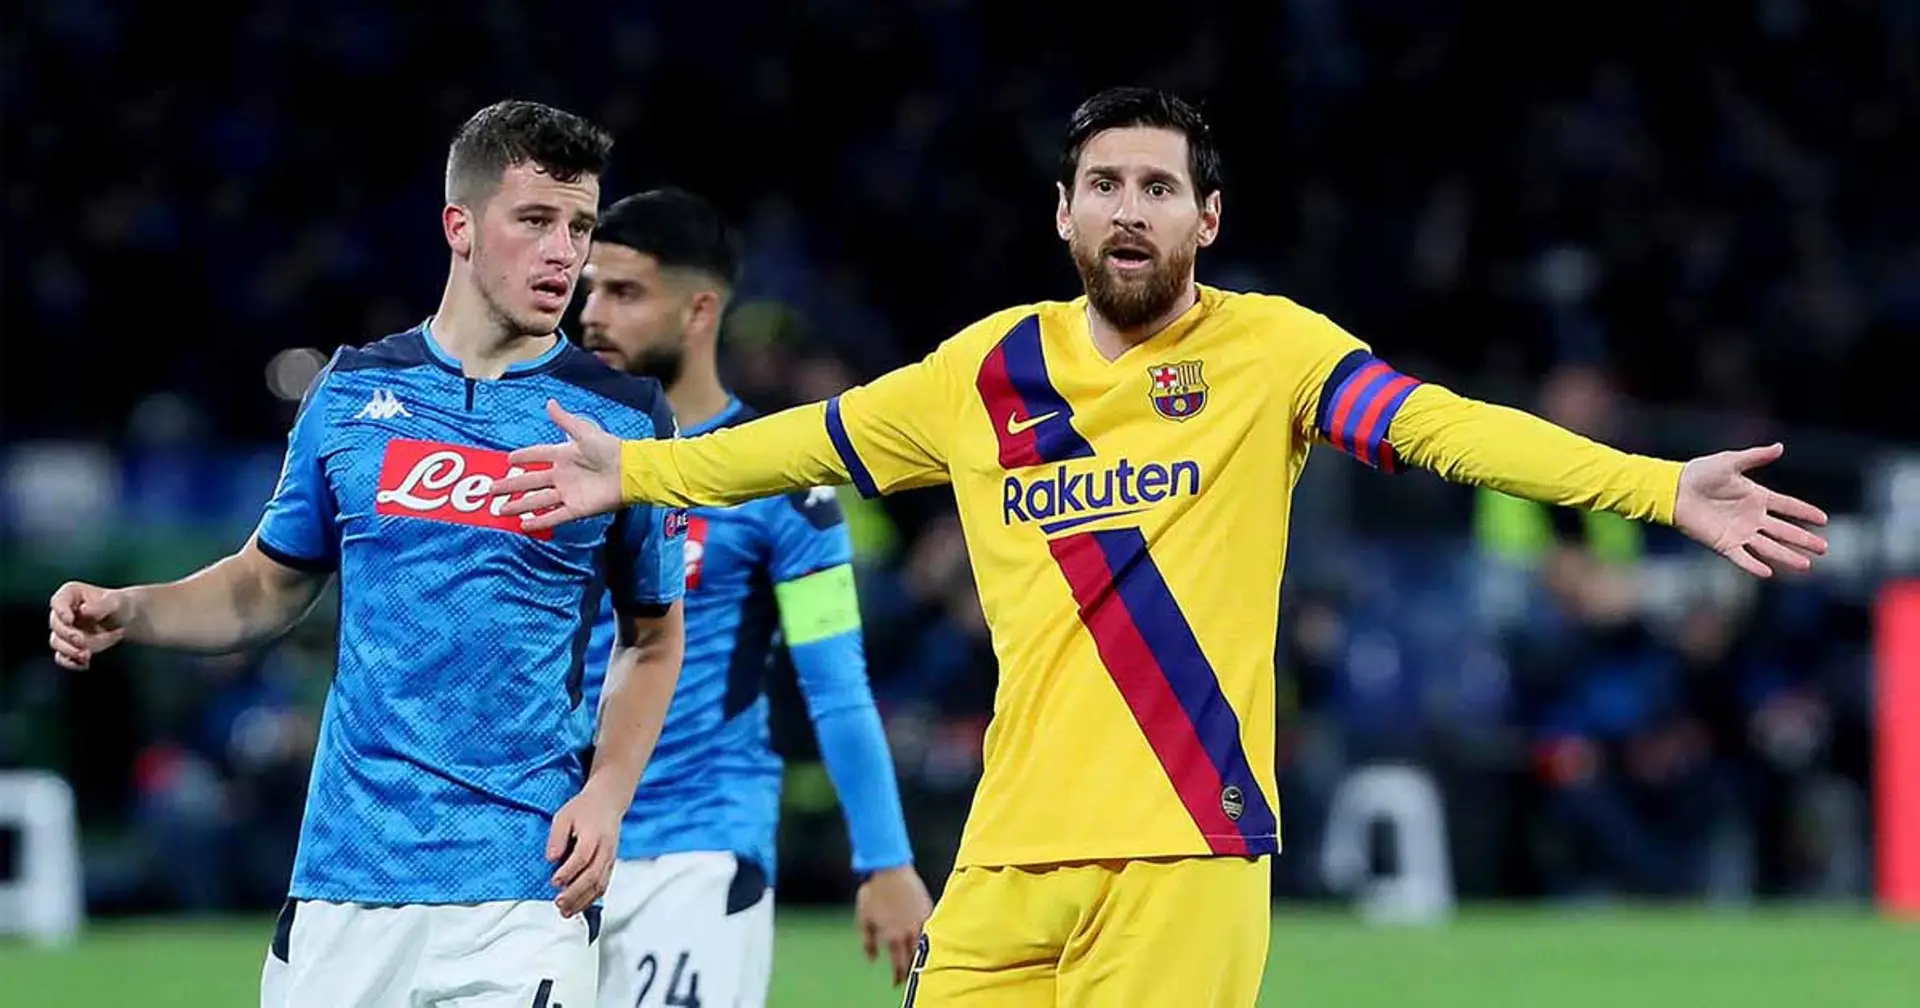 Napoli's Diego Demme recalls facing Messi: 'He's a really crazy player'